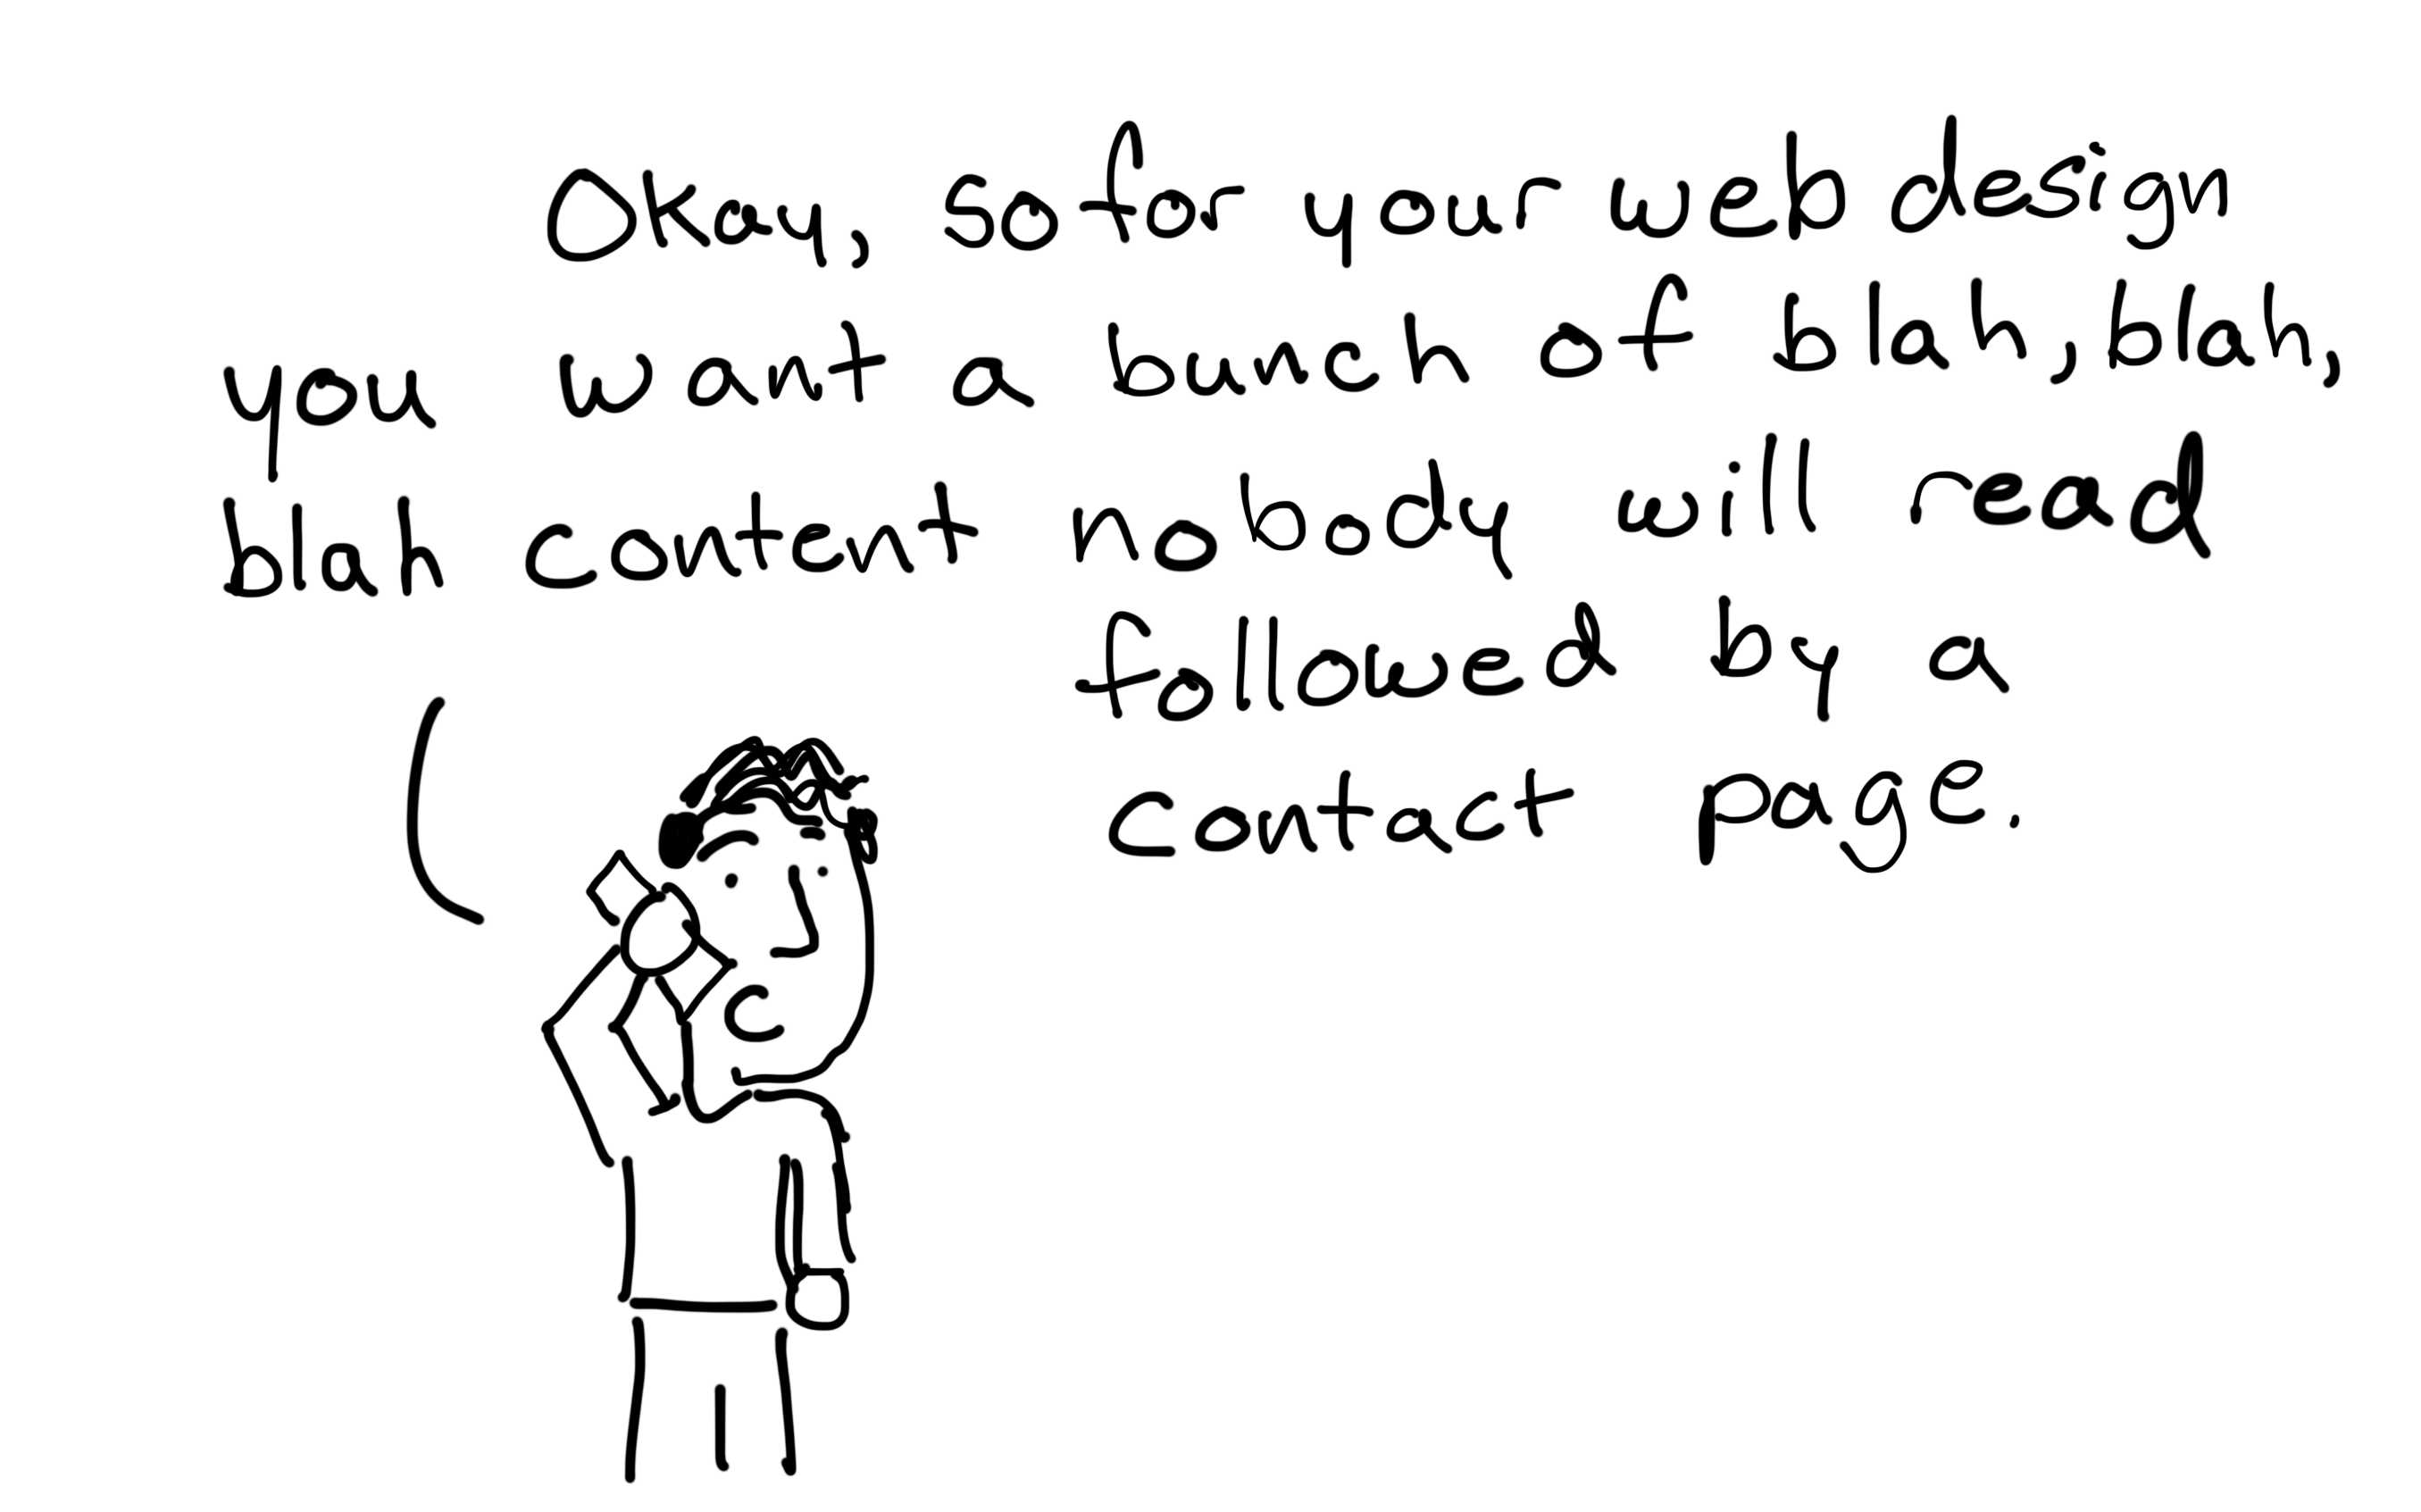 Okay, so for your web design you want a bunch of blah, blah, blah content followed by a contact page.